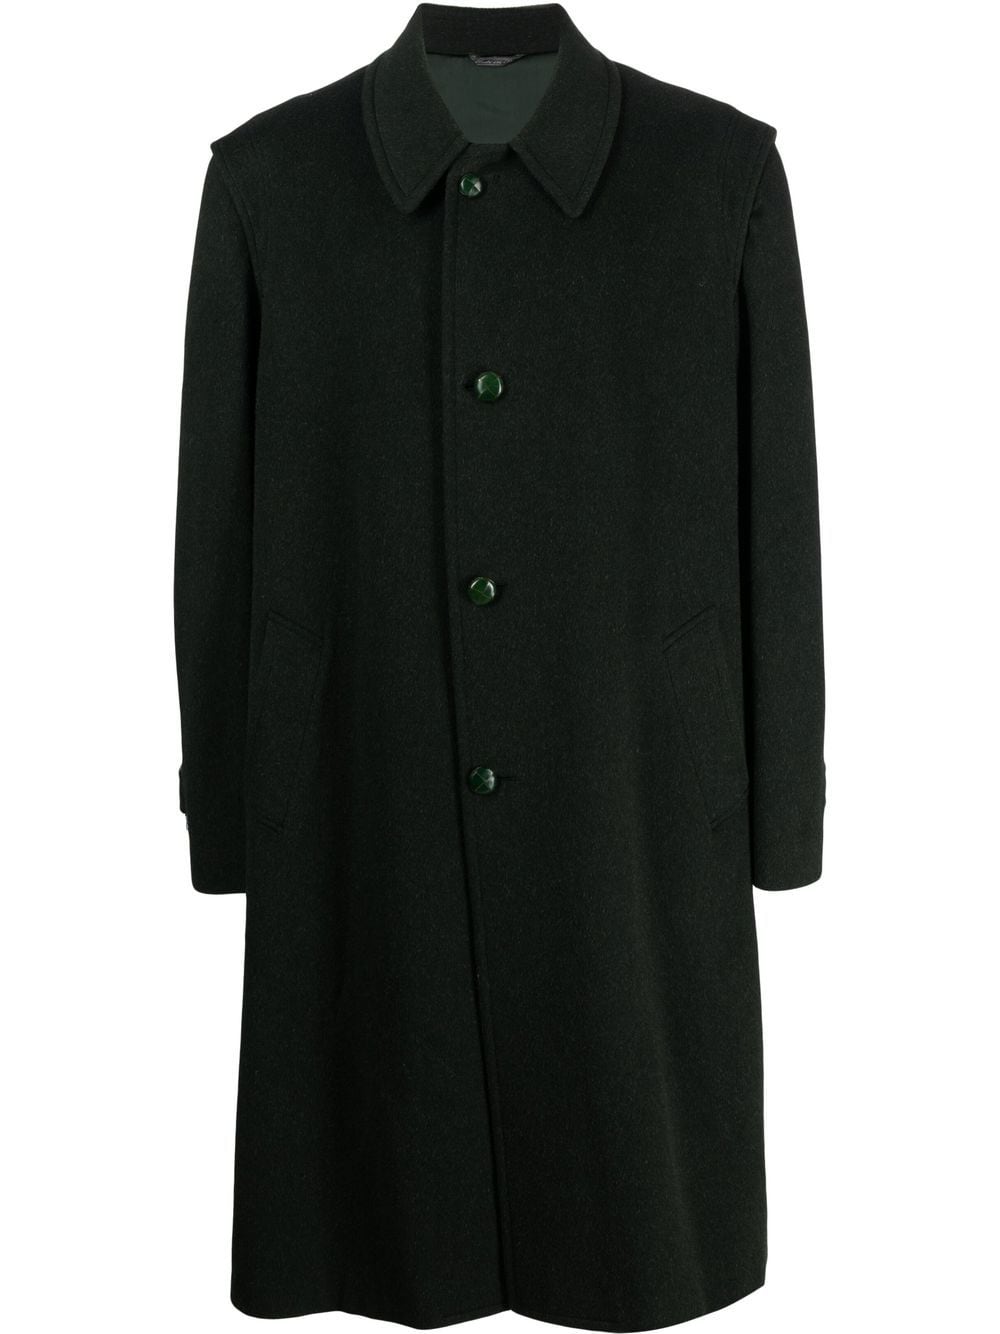 A.N.G.E.L.O. Vintage Cult 1970s single-breasted long coat - Green von A.N.G.E.L.O. Vintage Cult